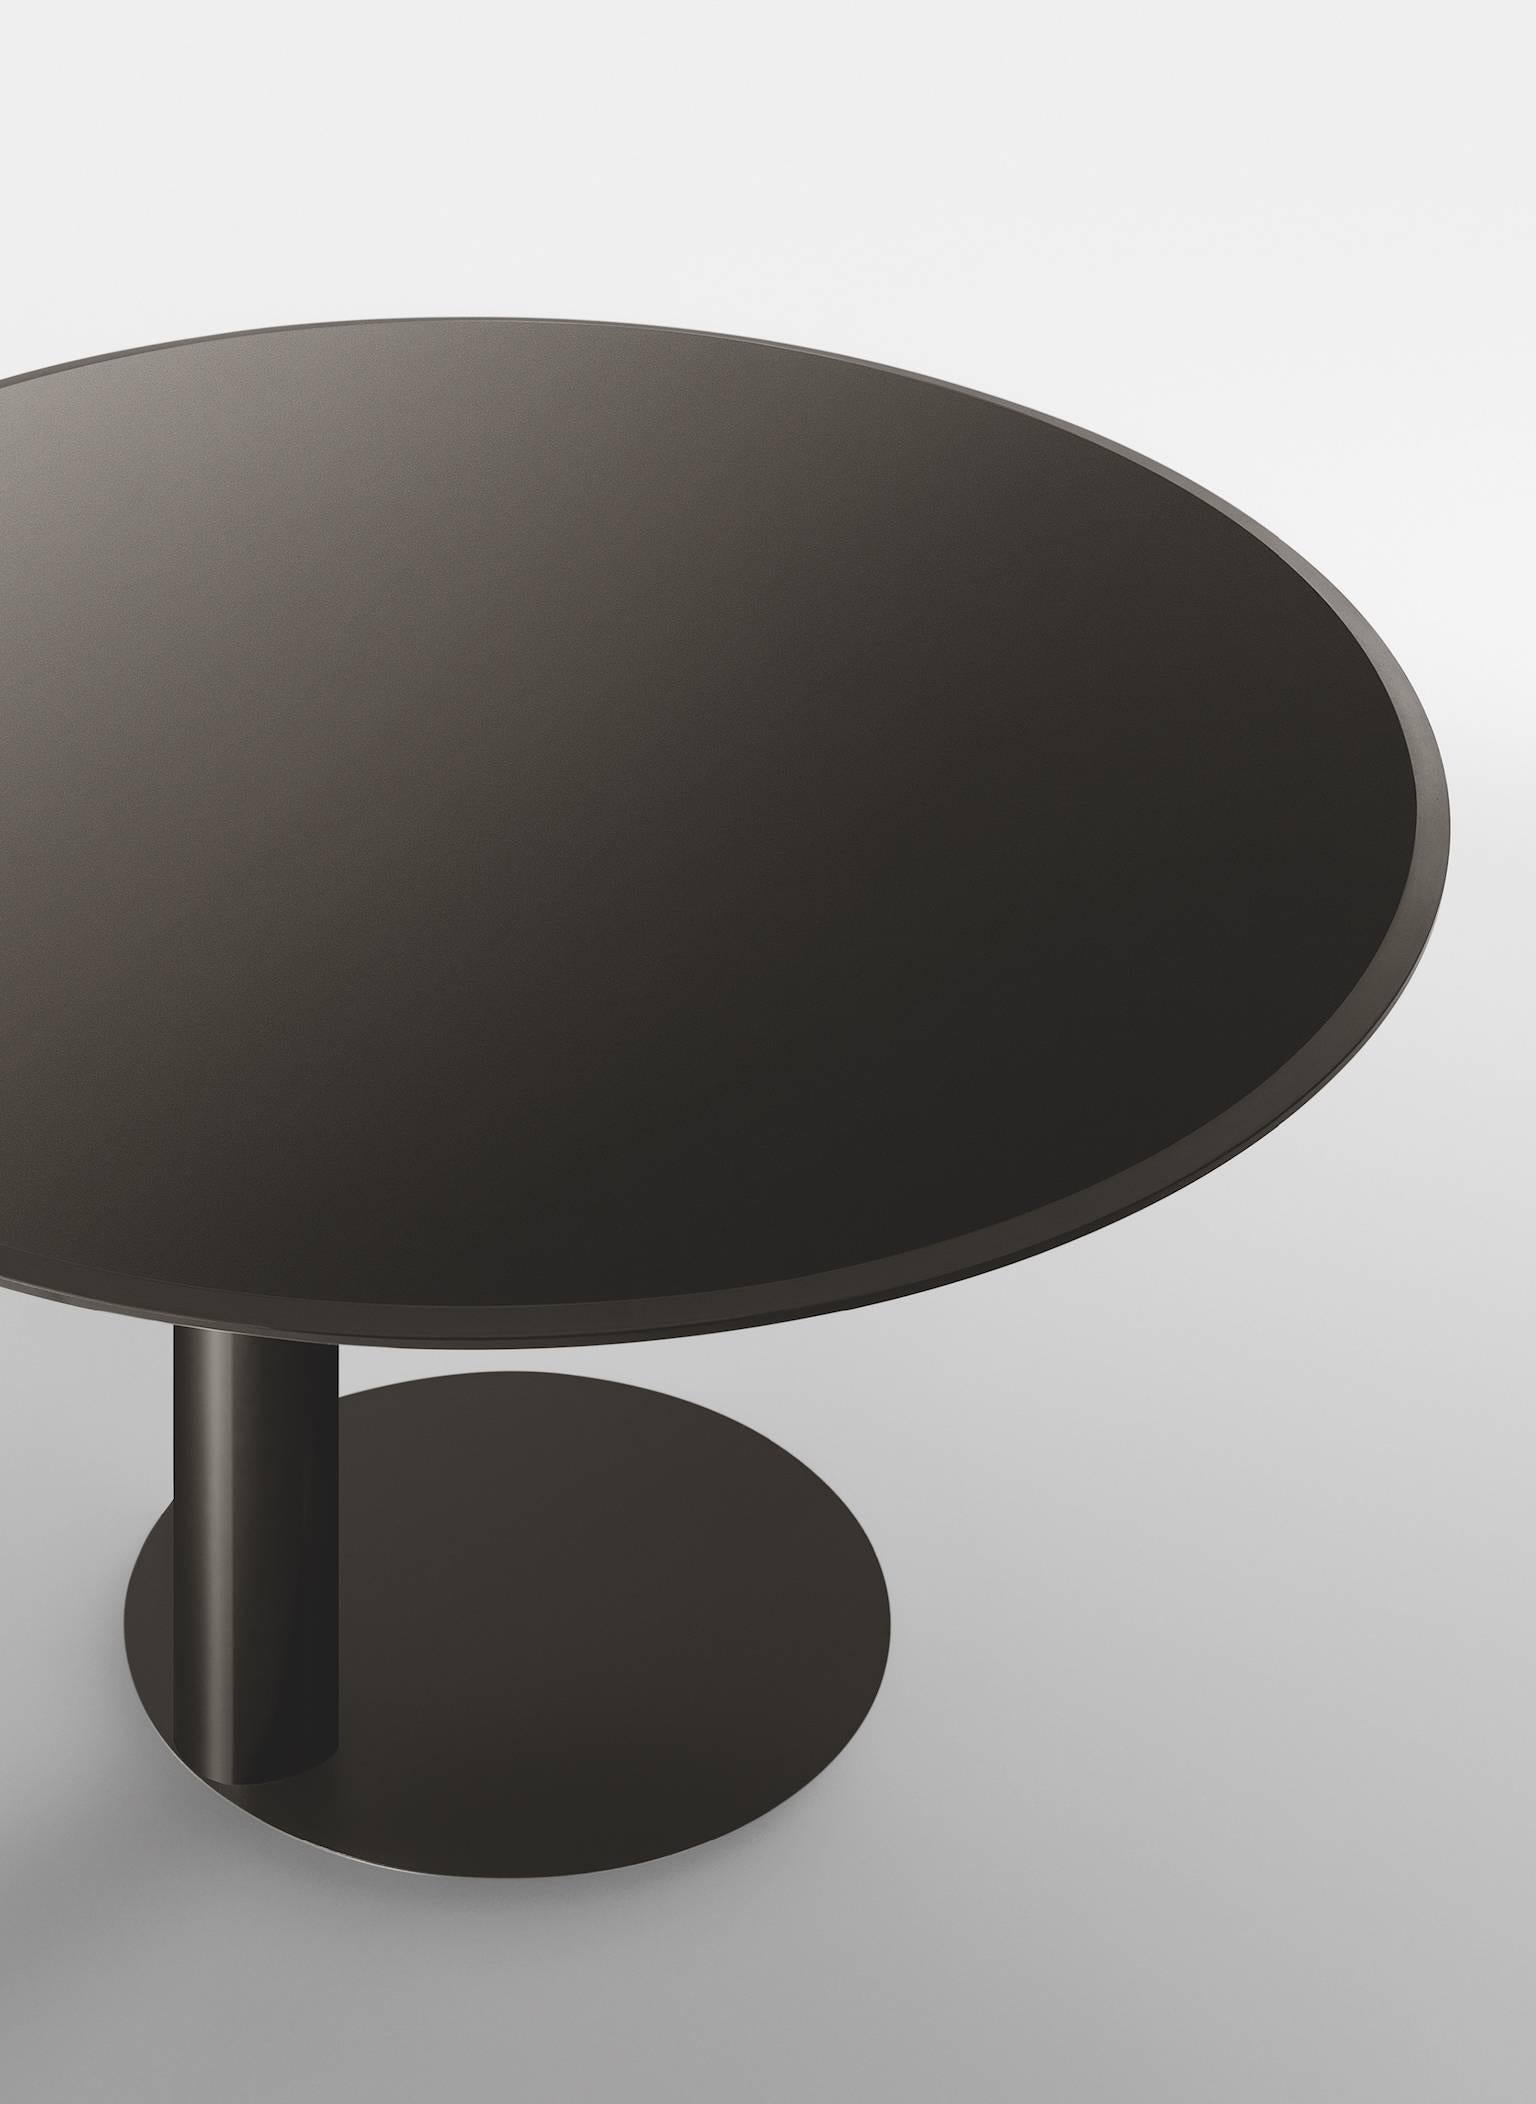 Table with 15 mm bevelled and bright painted glass top. Bright lacquered metal structure. Available in the colours black, blue grey and liquorice.

Sizes:
35½